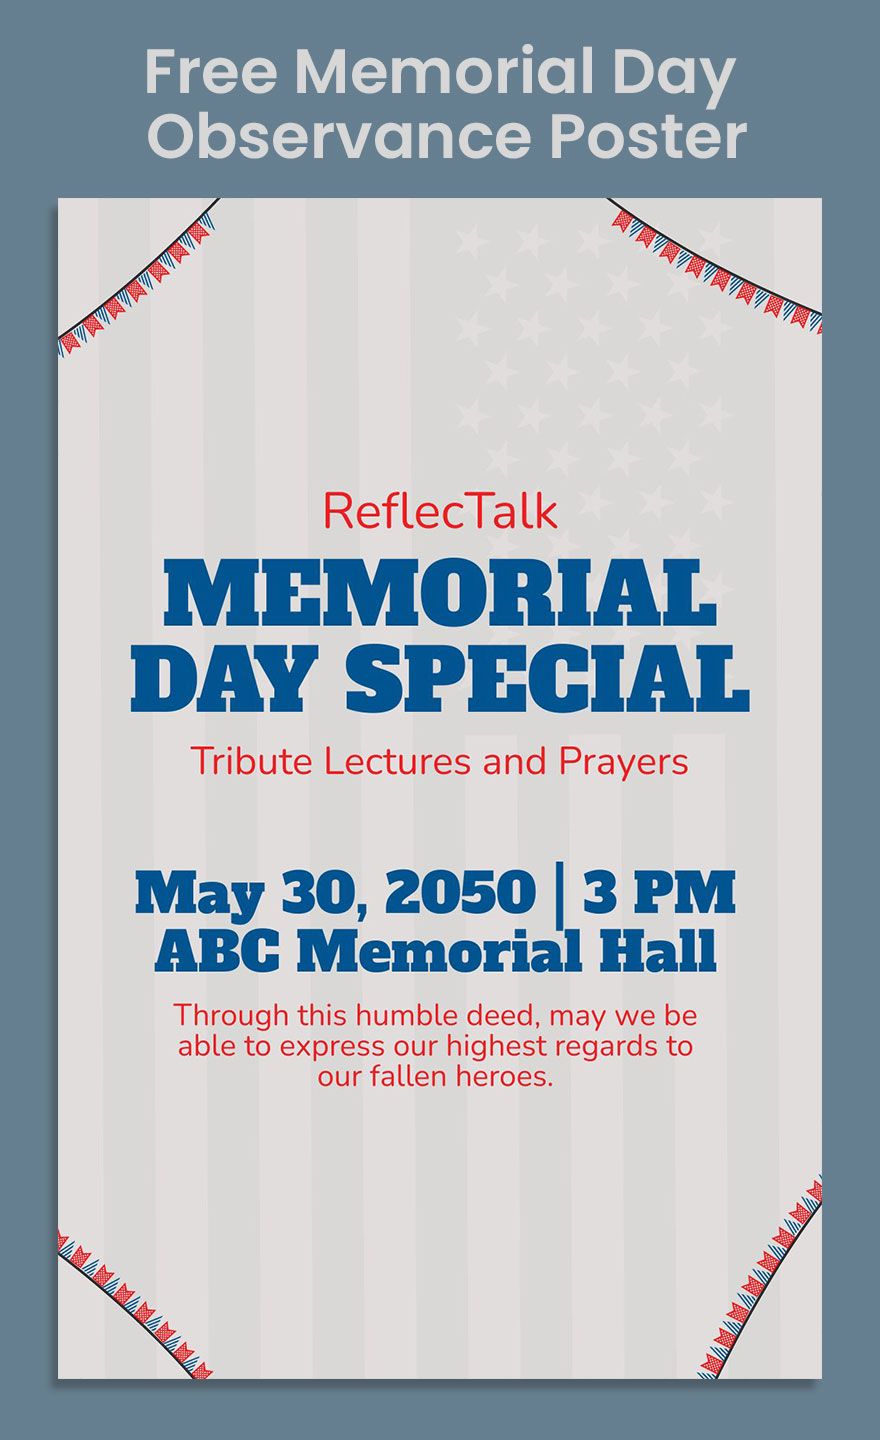 Free Memorial Day Observance Poster